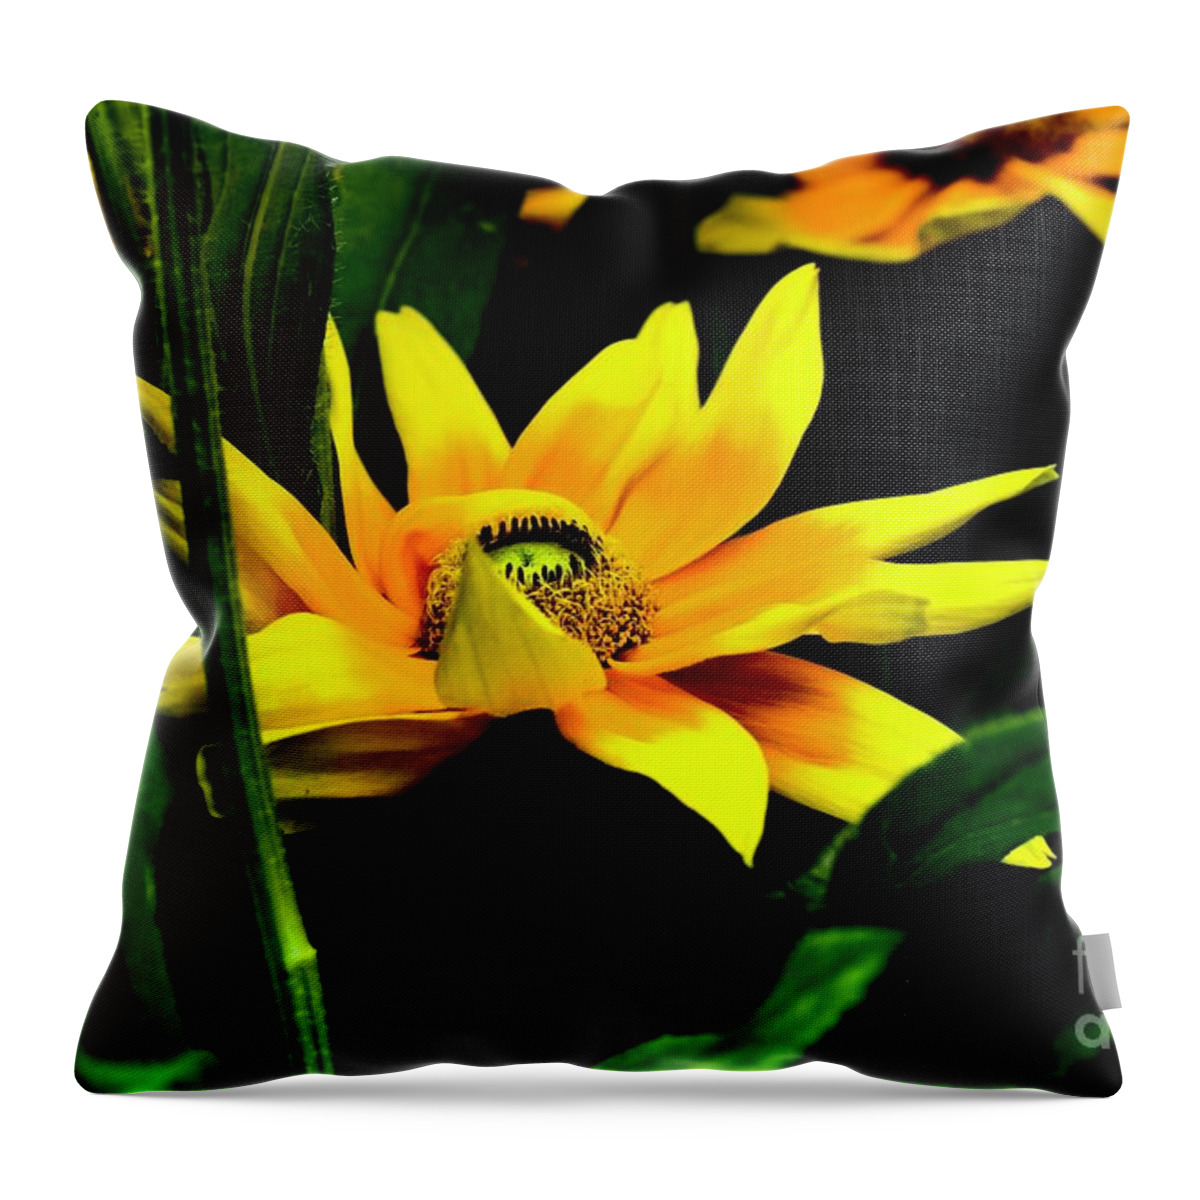 Floral Photography Throw Pillow featuring the photograph In The Middle 2 by Diana Mary Sharpton